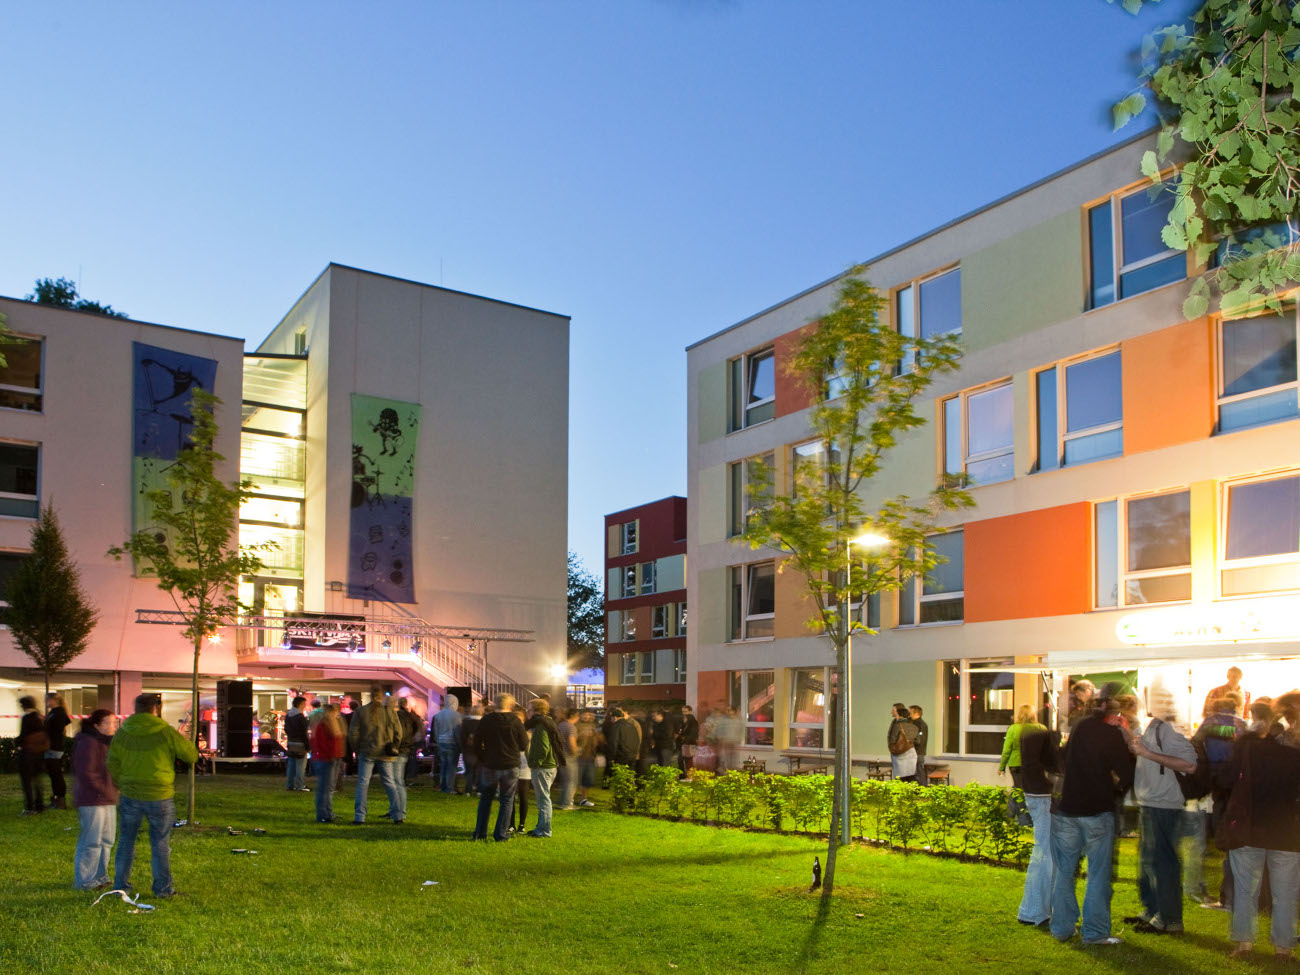 Exterior view of a student residence during an event.